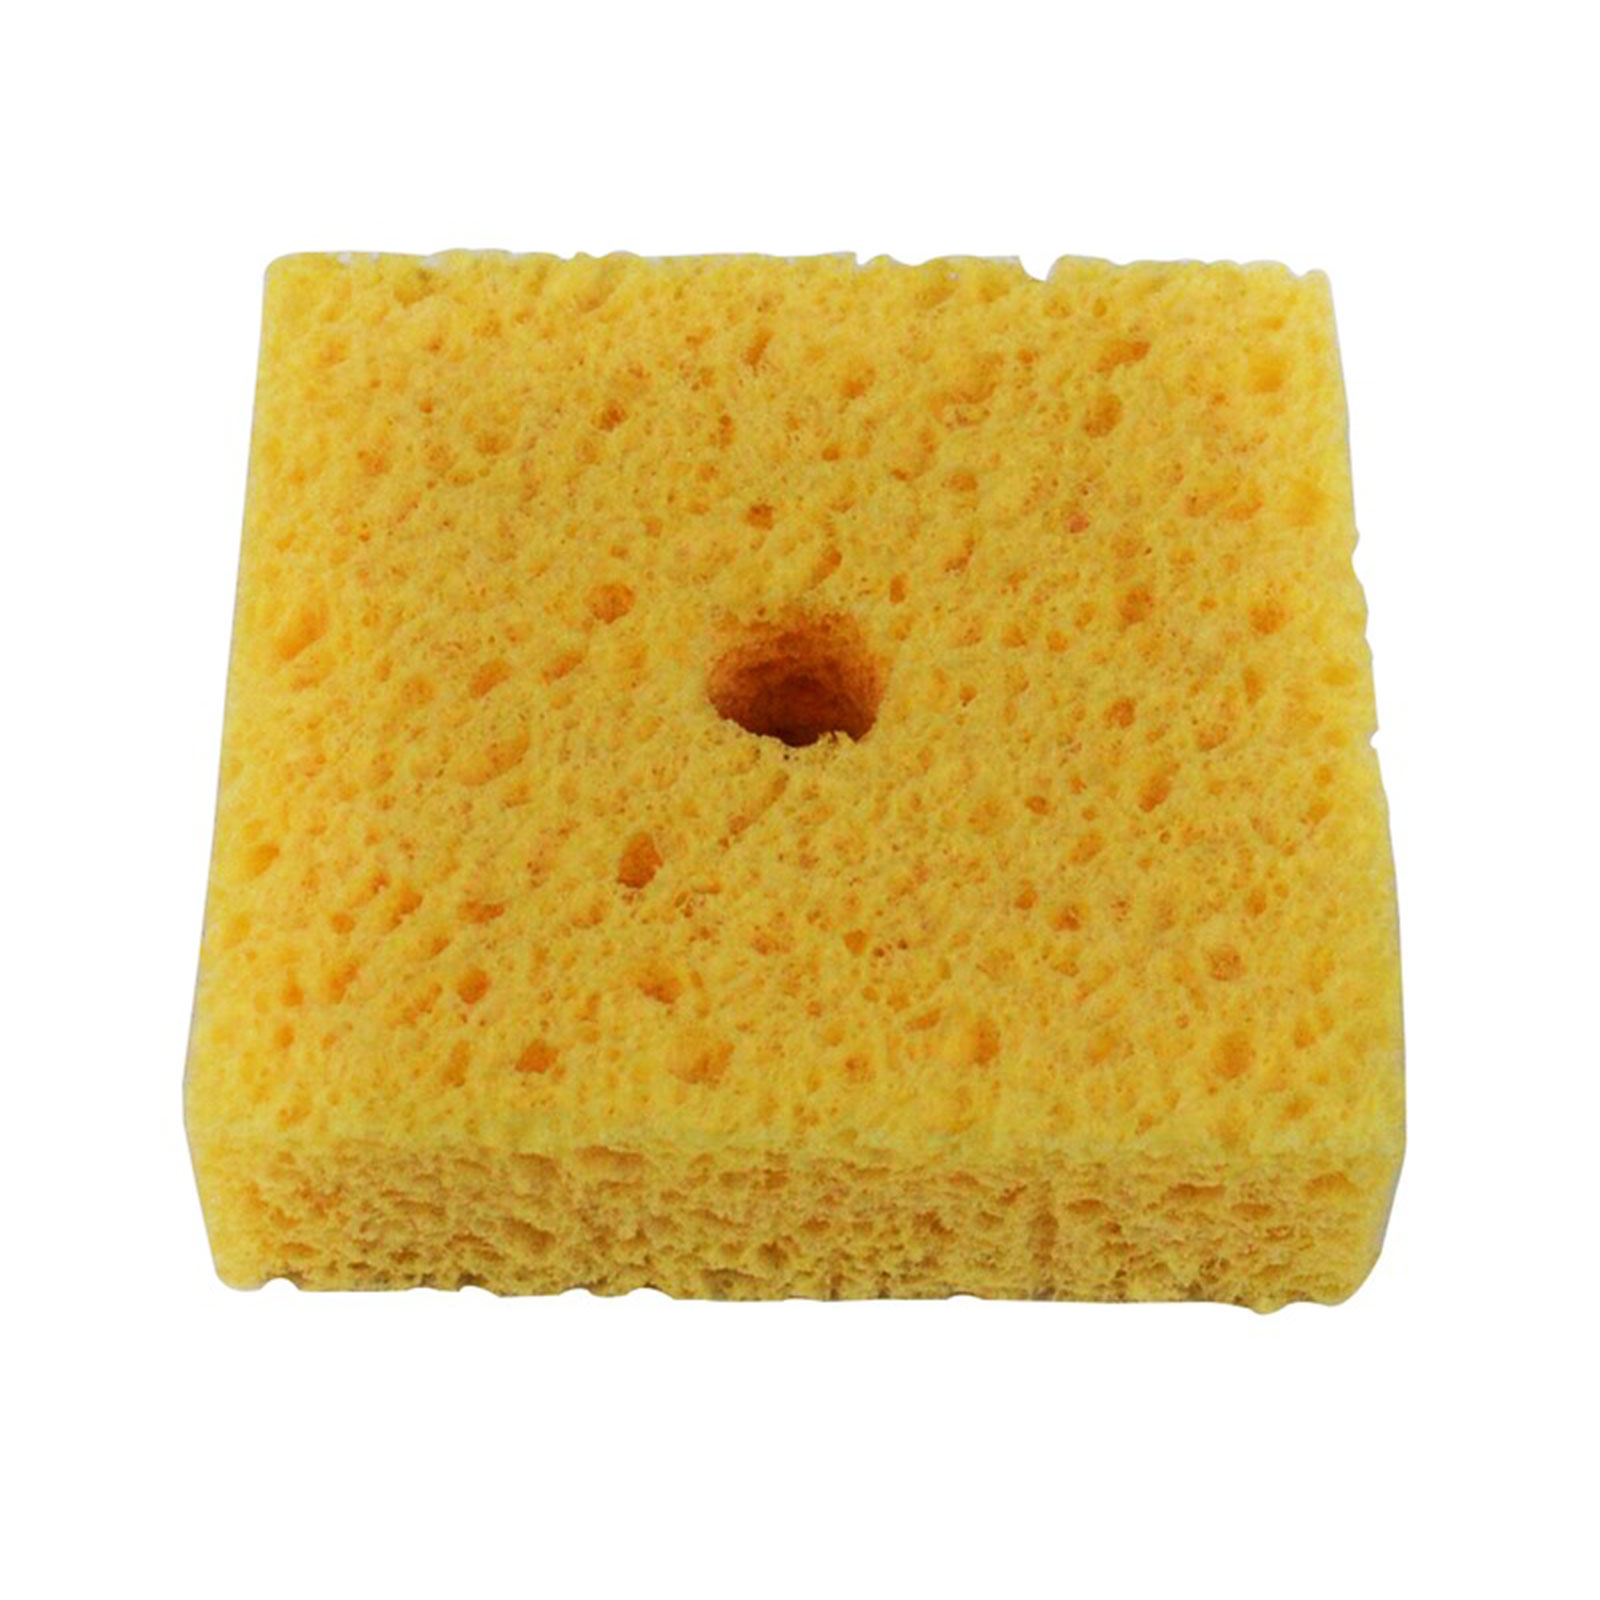 Single Center Hole Solder Sponge For Use With Soldering Irons, Workstands 2.20